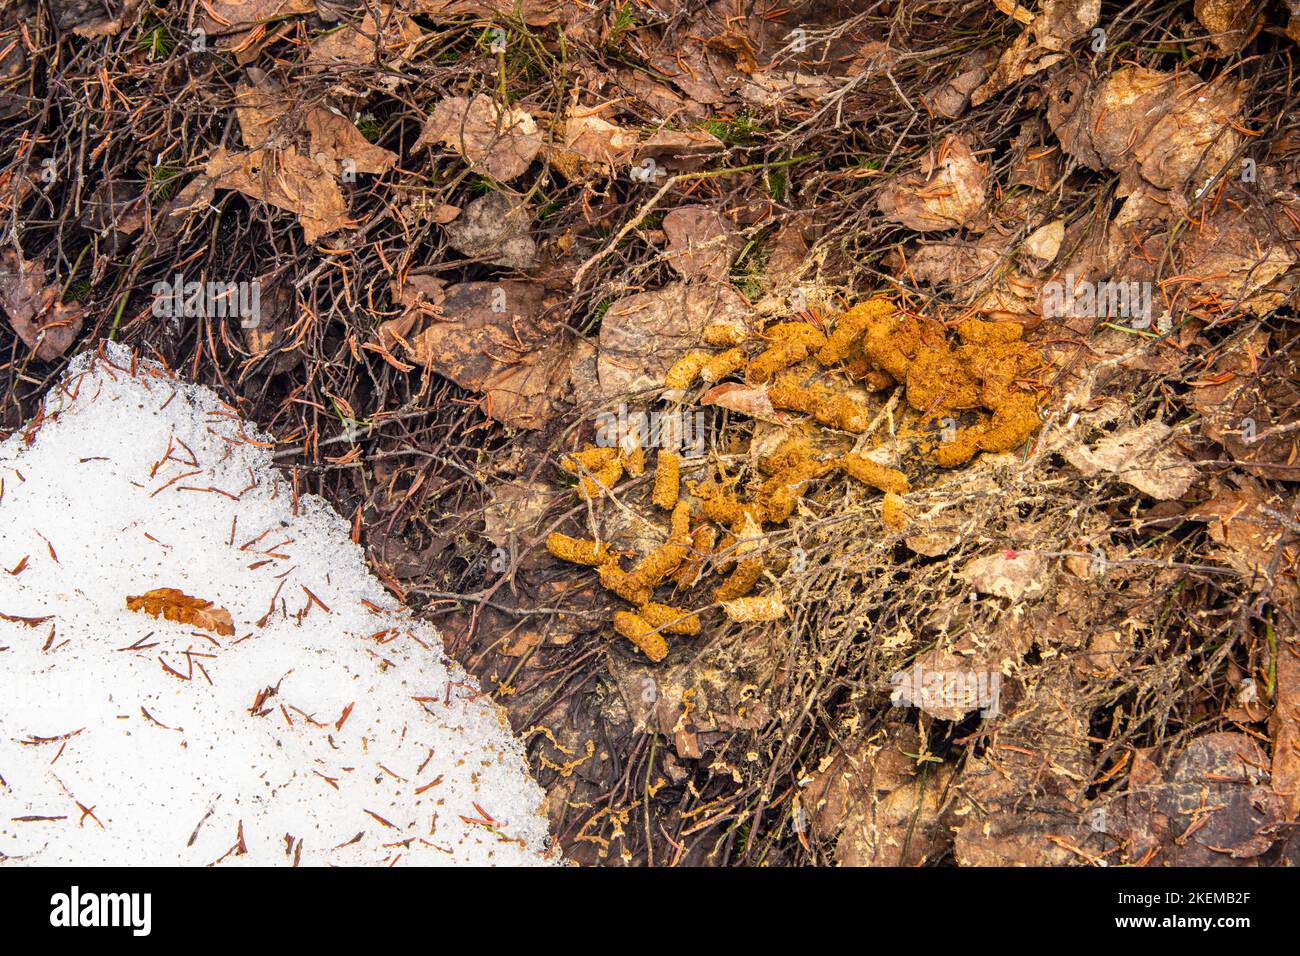 Melting snow with grouse droppings, Greater Sudbury, Ontario, Canada Stock Photo